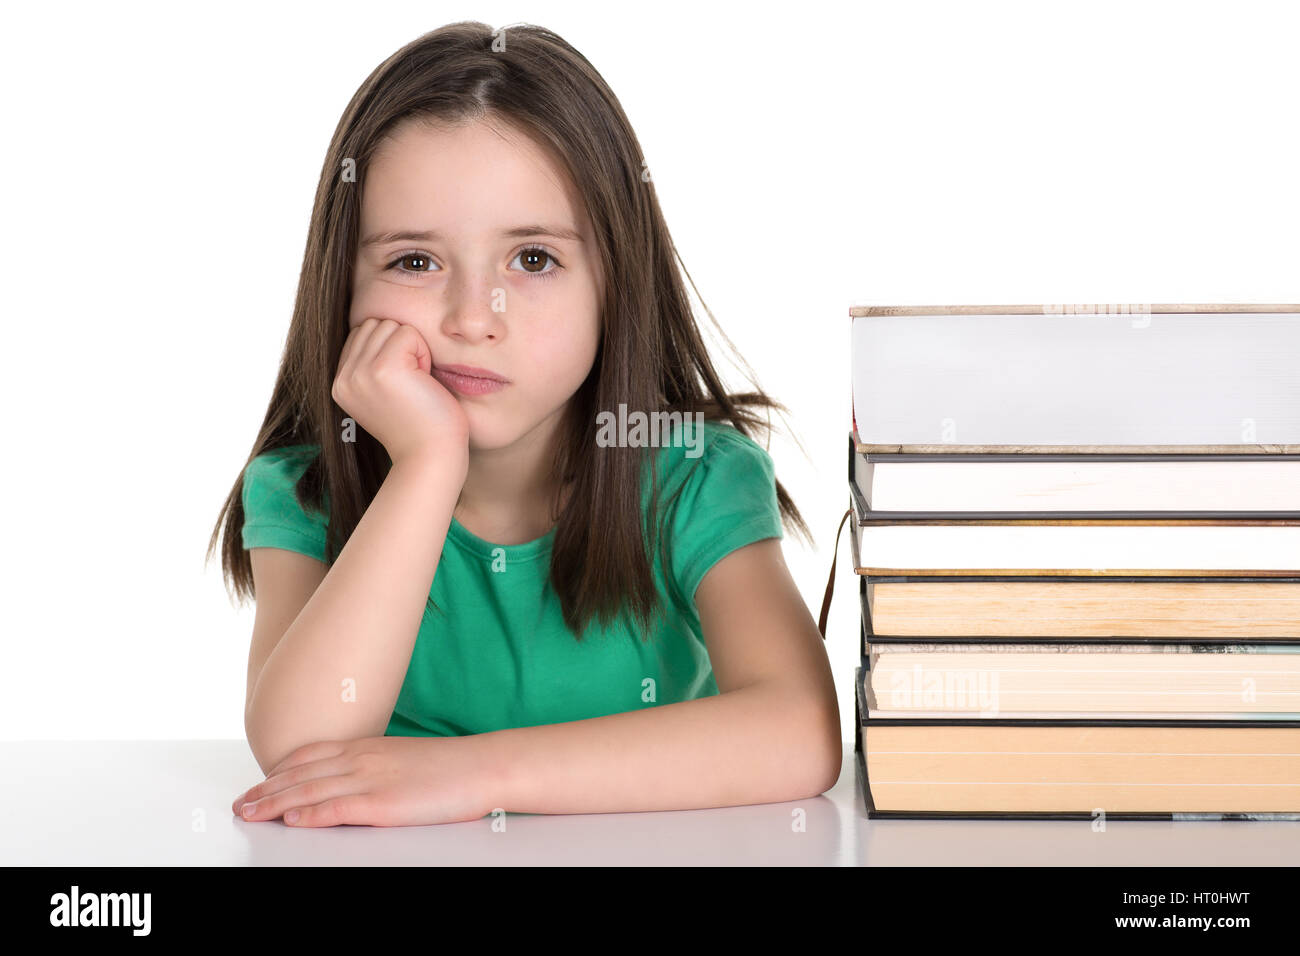 School girl sitting by the stack of books with grim bored face. Isolated on a white background. Stock Photo